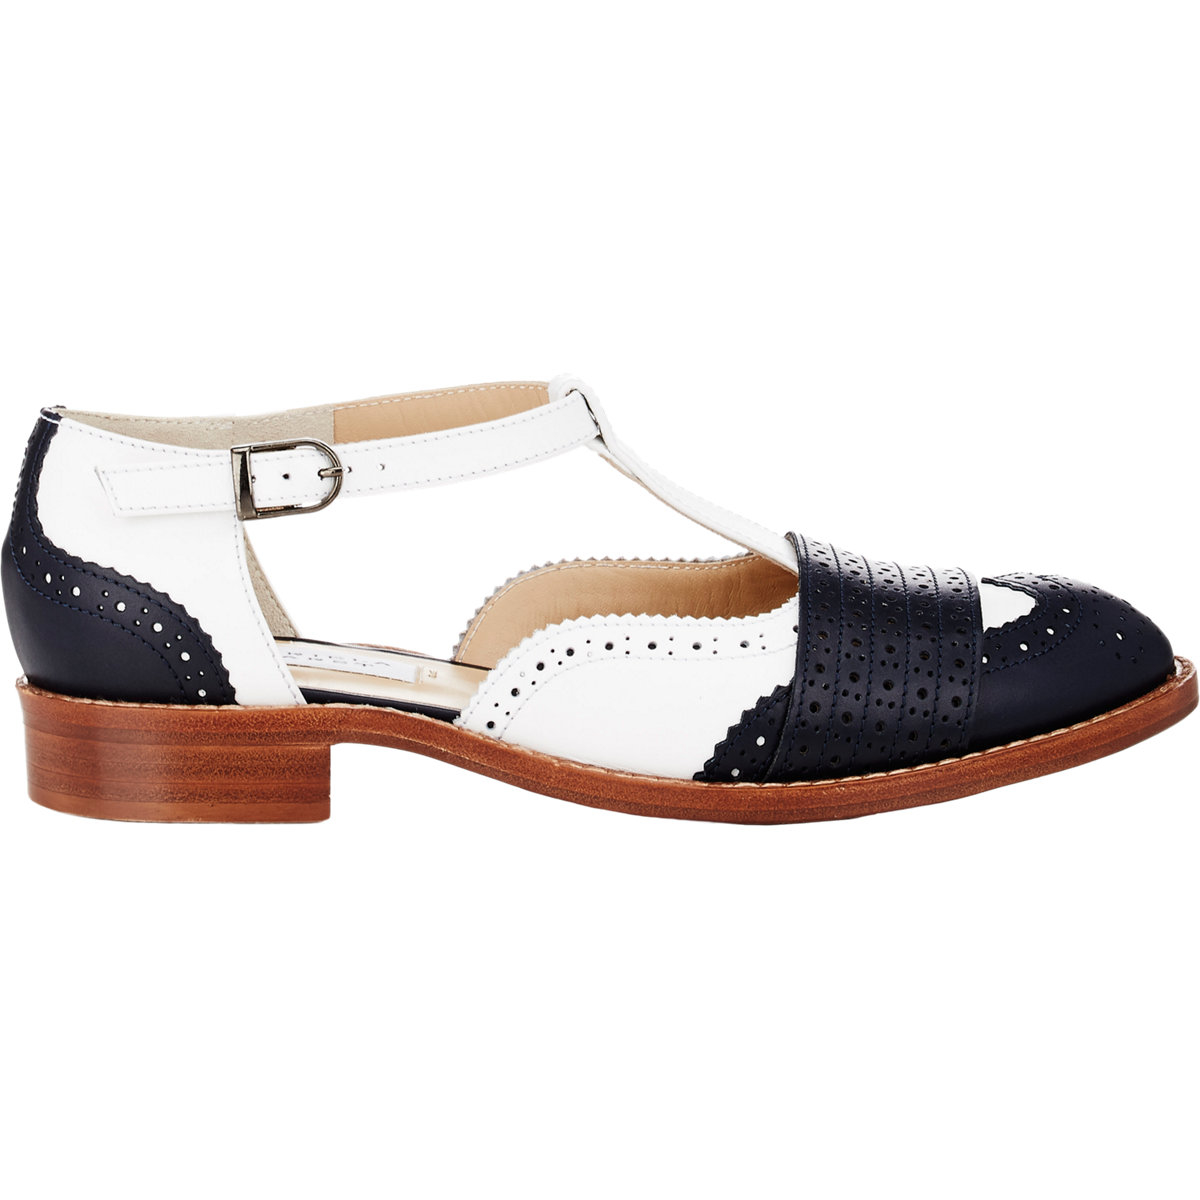 gabriela-hearst-white-chilton-t-strap-brogues-product-0-868685272-normal